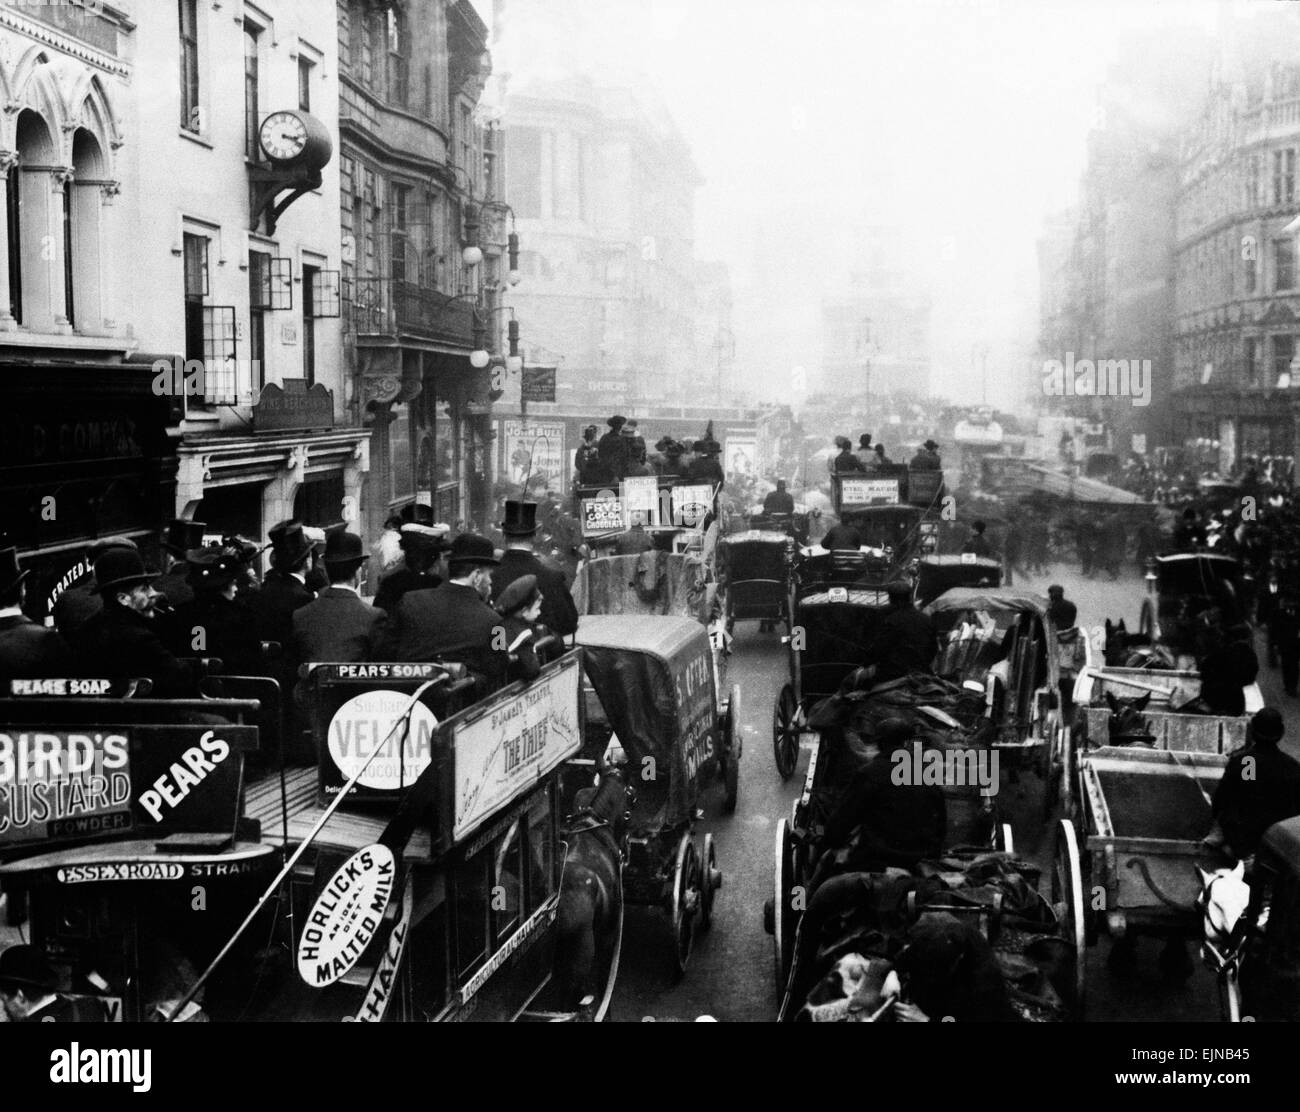 Horse drawn carriages and buses shown in congestion at The Strand, London, November 1908 Stock Photo